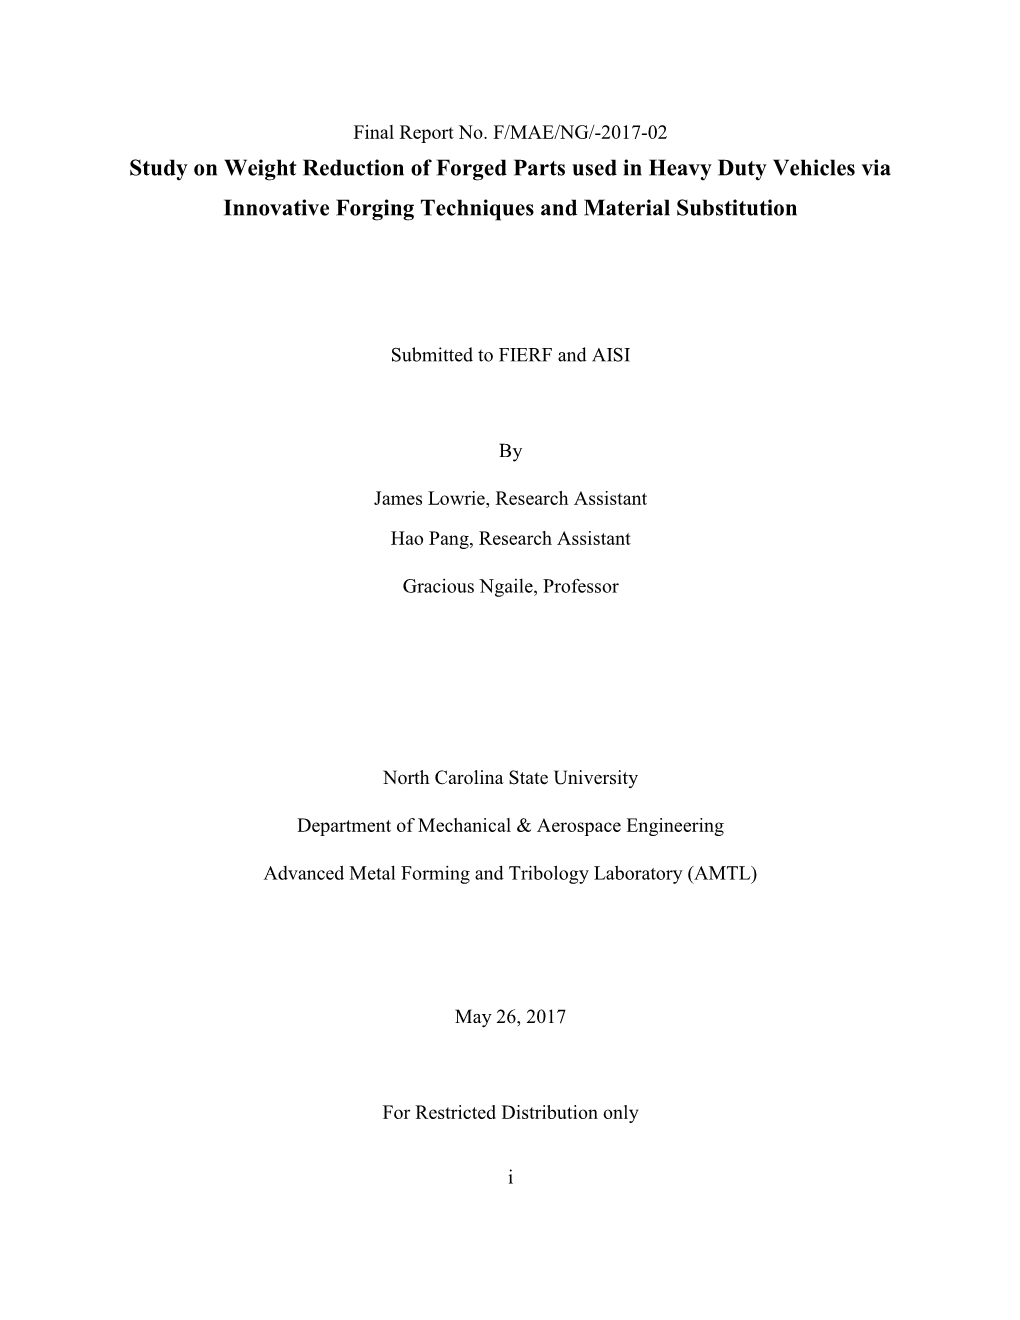 Study on Weight Reduction of Forged Parts Used in Heavy Duty Vehicles Via Innovative Forging Techniques and Material Substitution